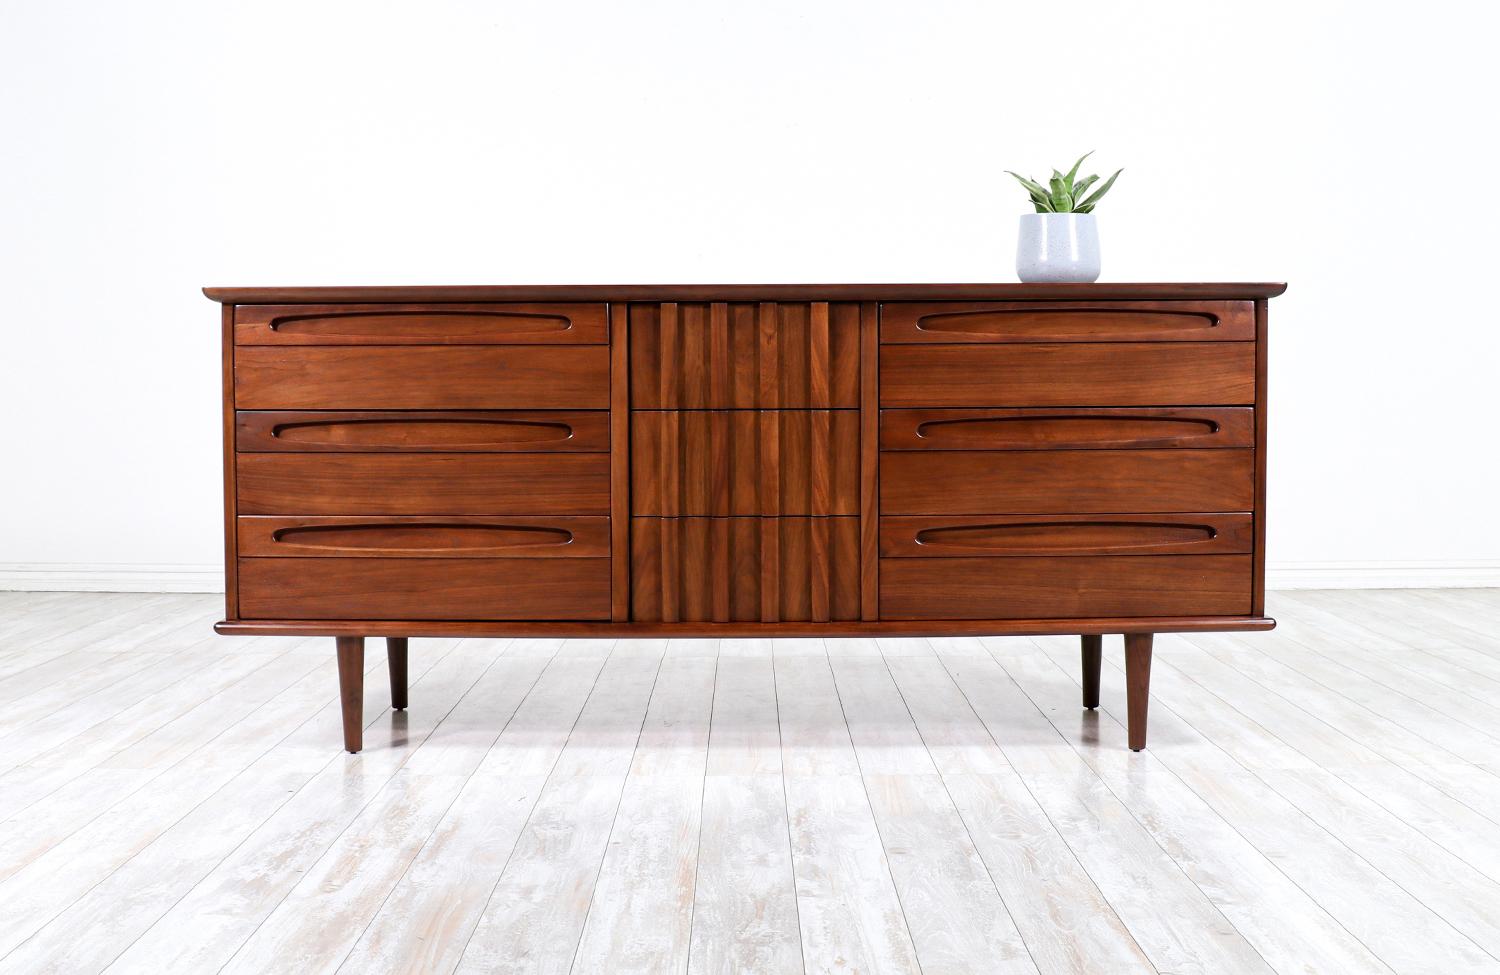 Mid-Century Modern 9-drawer dresser by American of Martinsville.

________________________________________

Transforming a piece of Mid-Century Modern furniture is like bringing history back to life, and we take this journey with passion and